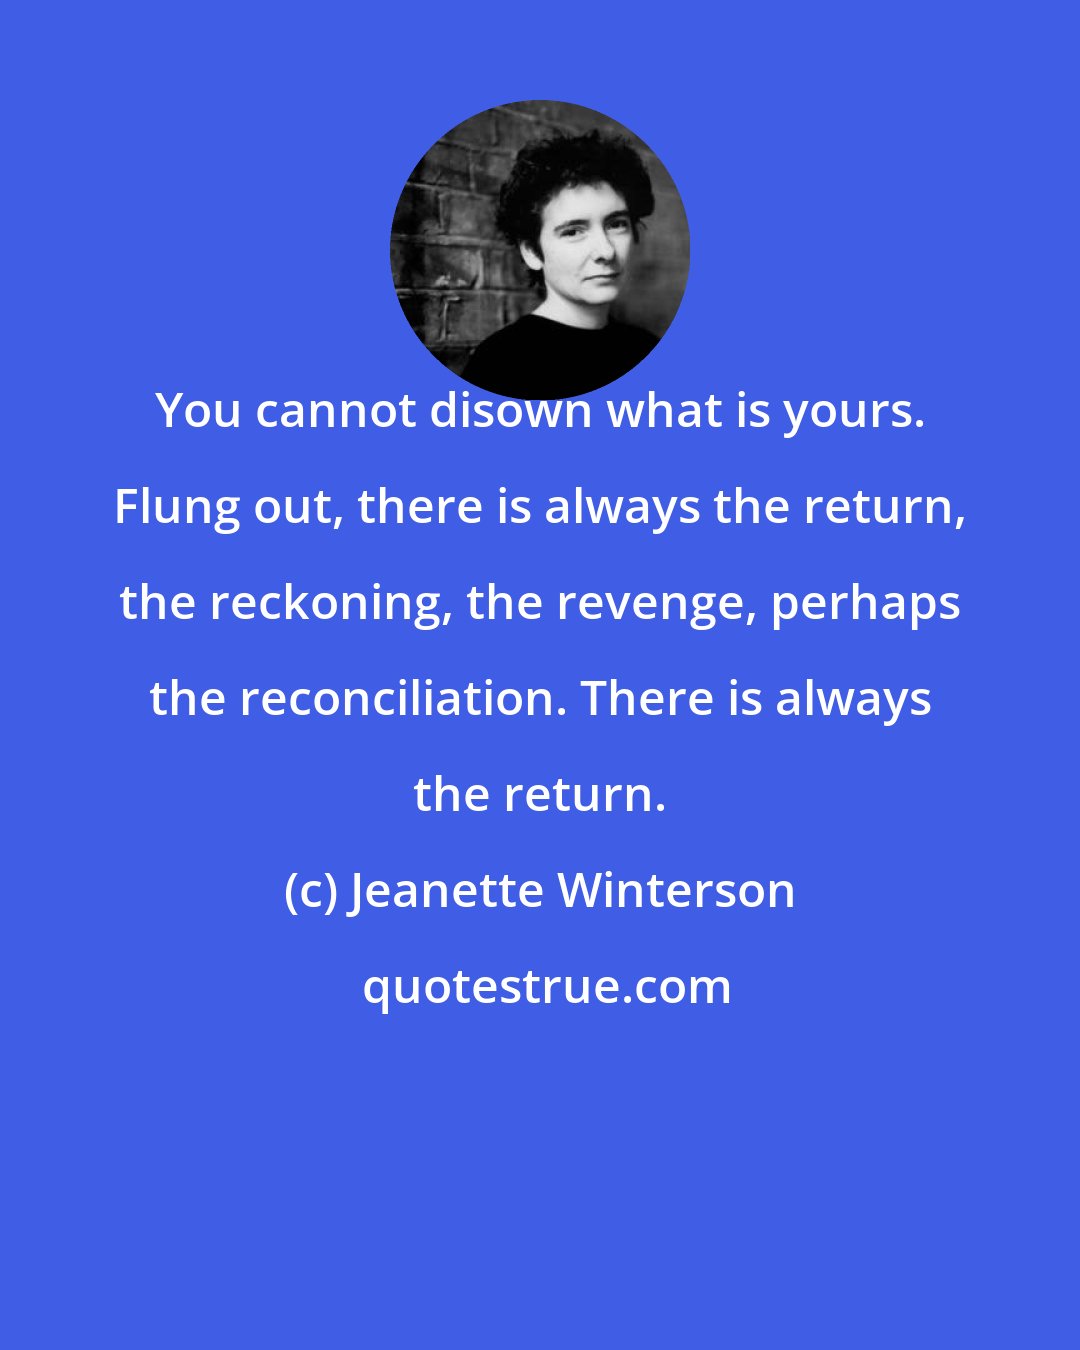 Jeanette Winterson: You cannot disown what is yours. Flung out, there is always the return, the reckoning, the revenge, perhaps the reconciliation. There is always the return.